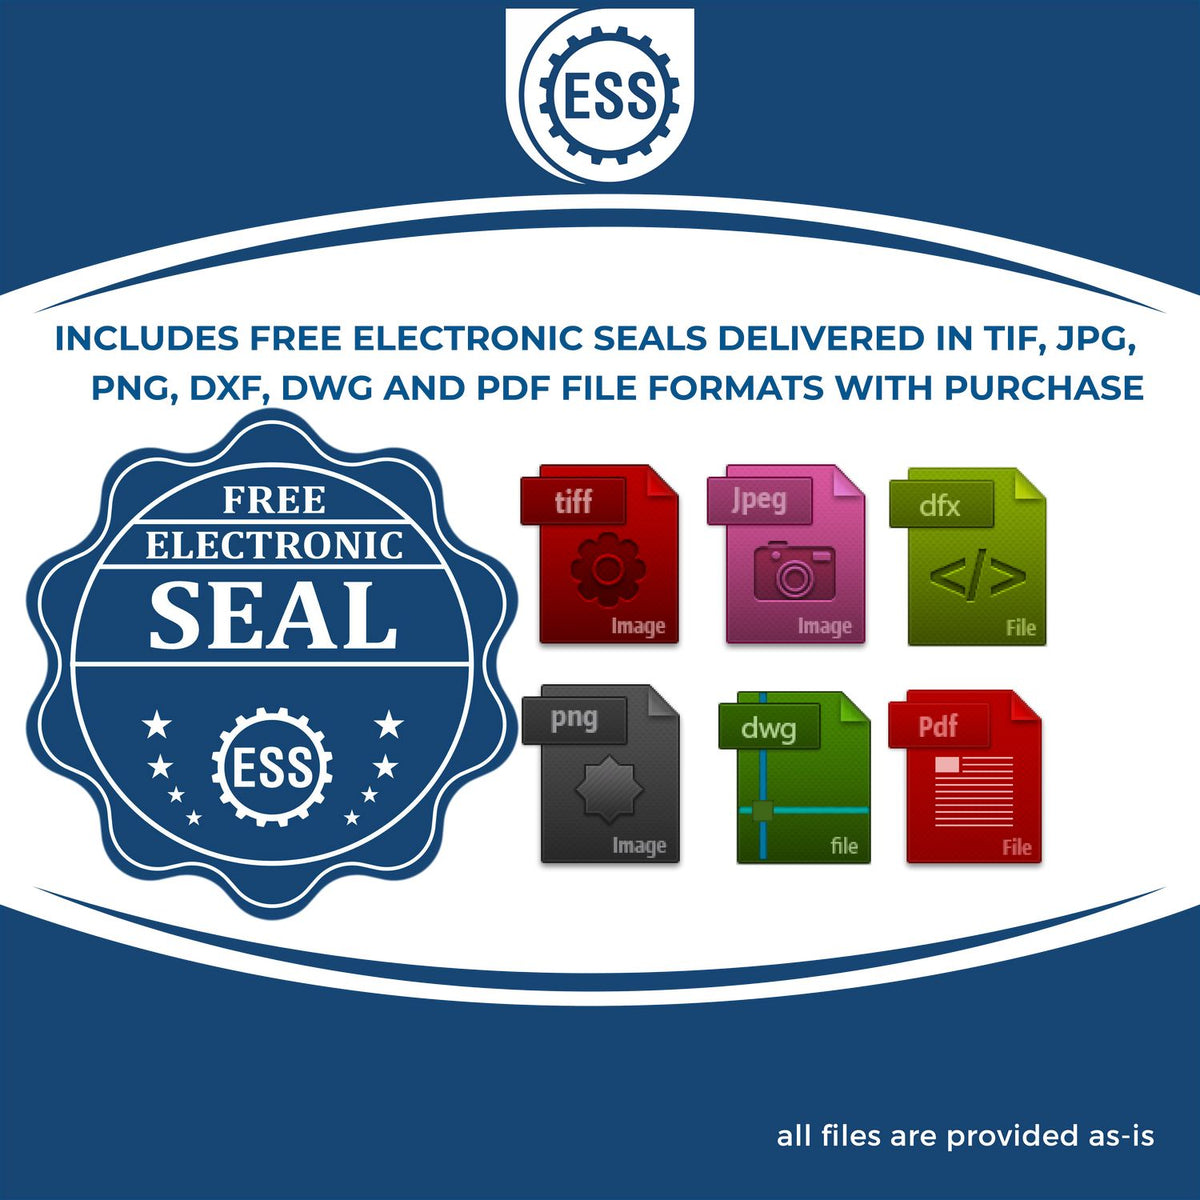 An infographic for the free electronic seal for the Arizona Engineer Desk Seal illustrating the different file type icons such as DXF, DWG, TIF, JPG and PNG.